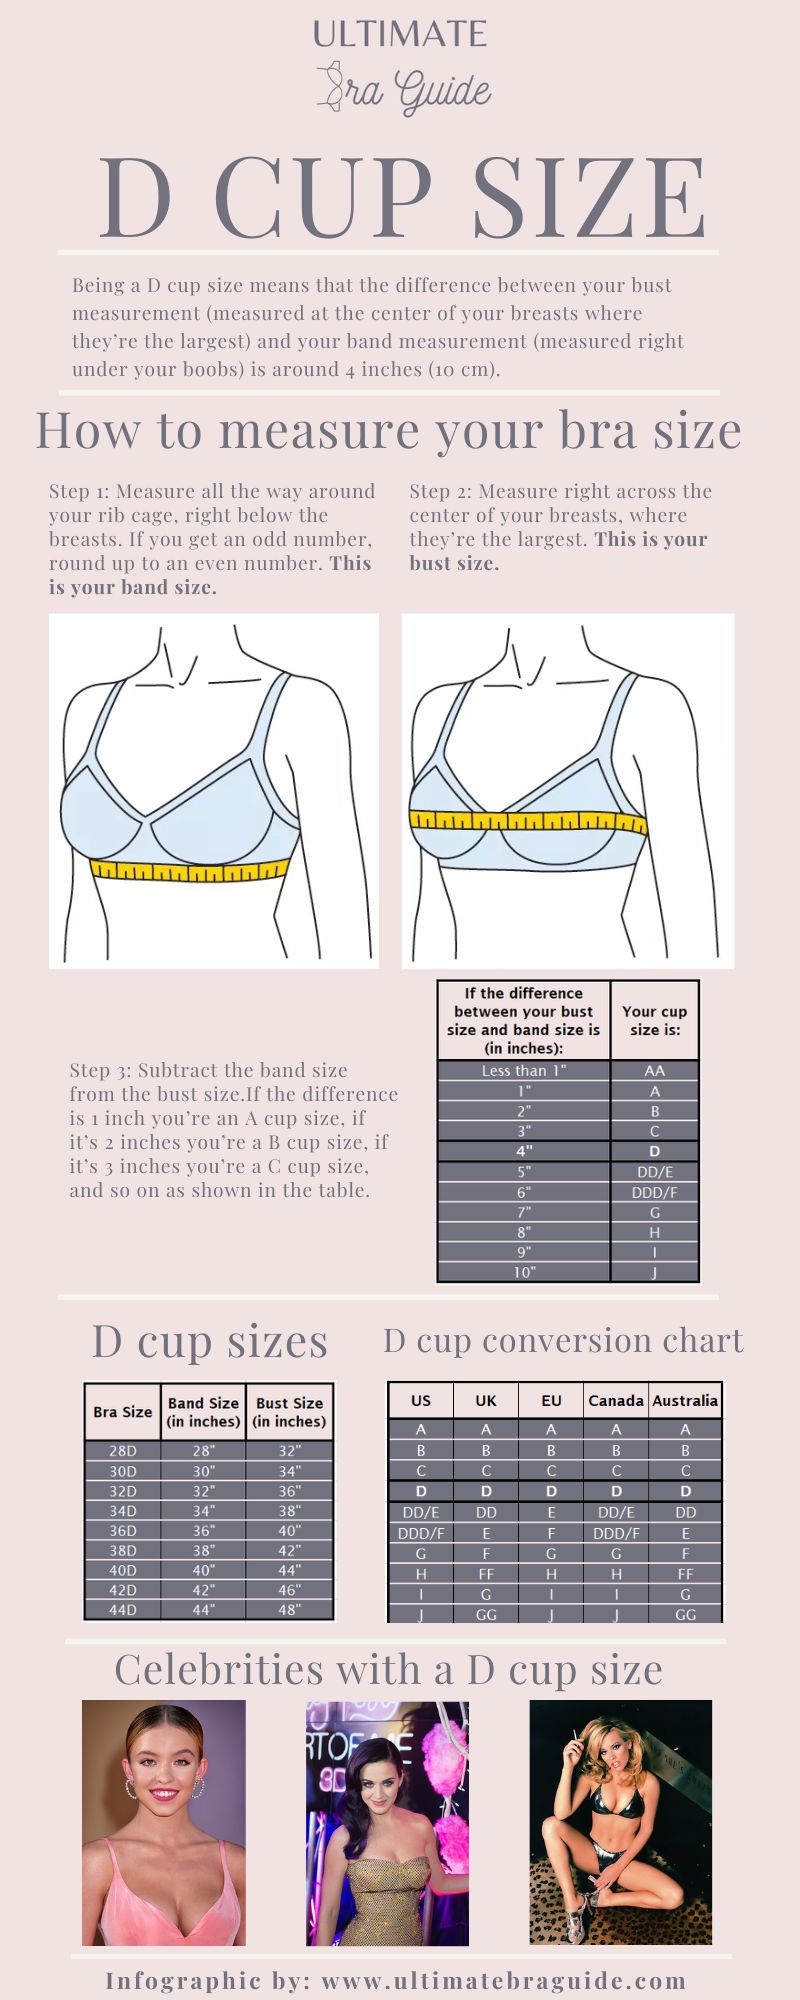 An infographic all about the D cup size - what it is, how to measure if you're D cup, a D cup conversion chart, D cup examples, and so on